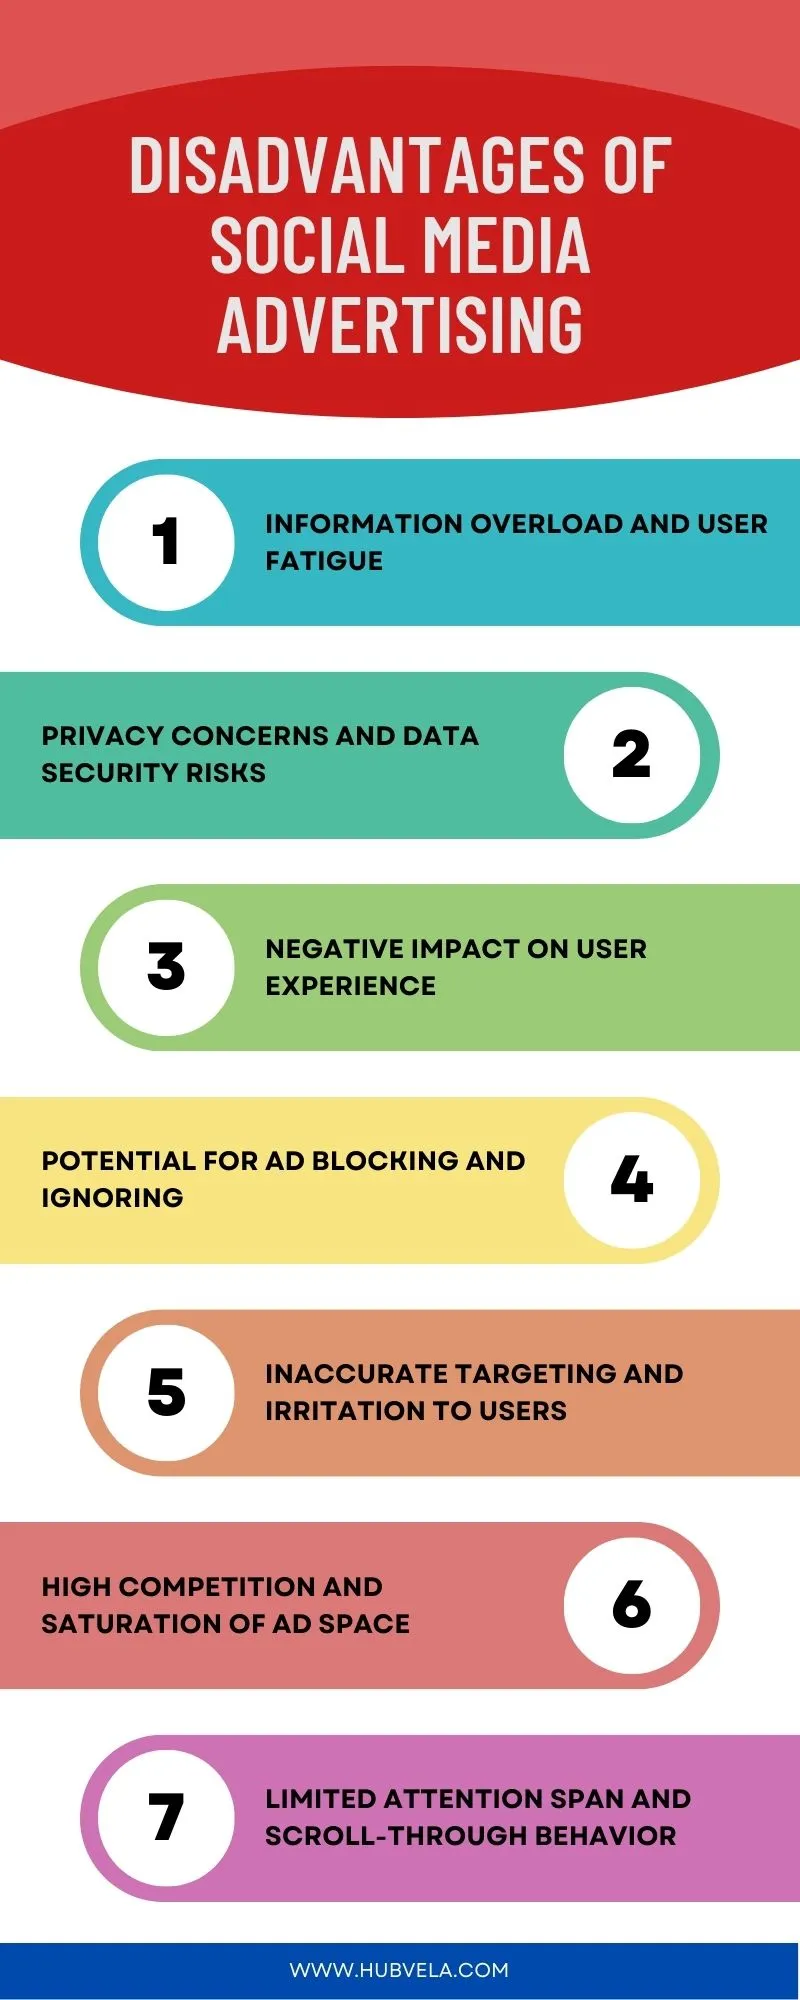 Disadvantages of Social Media Advertising infographic